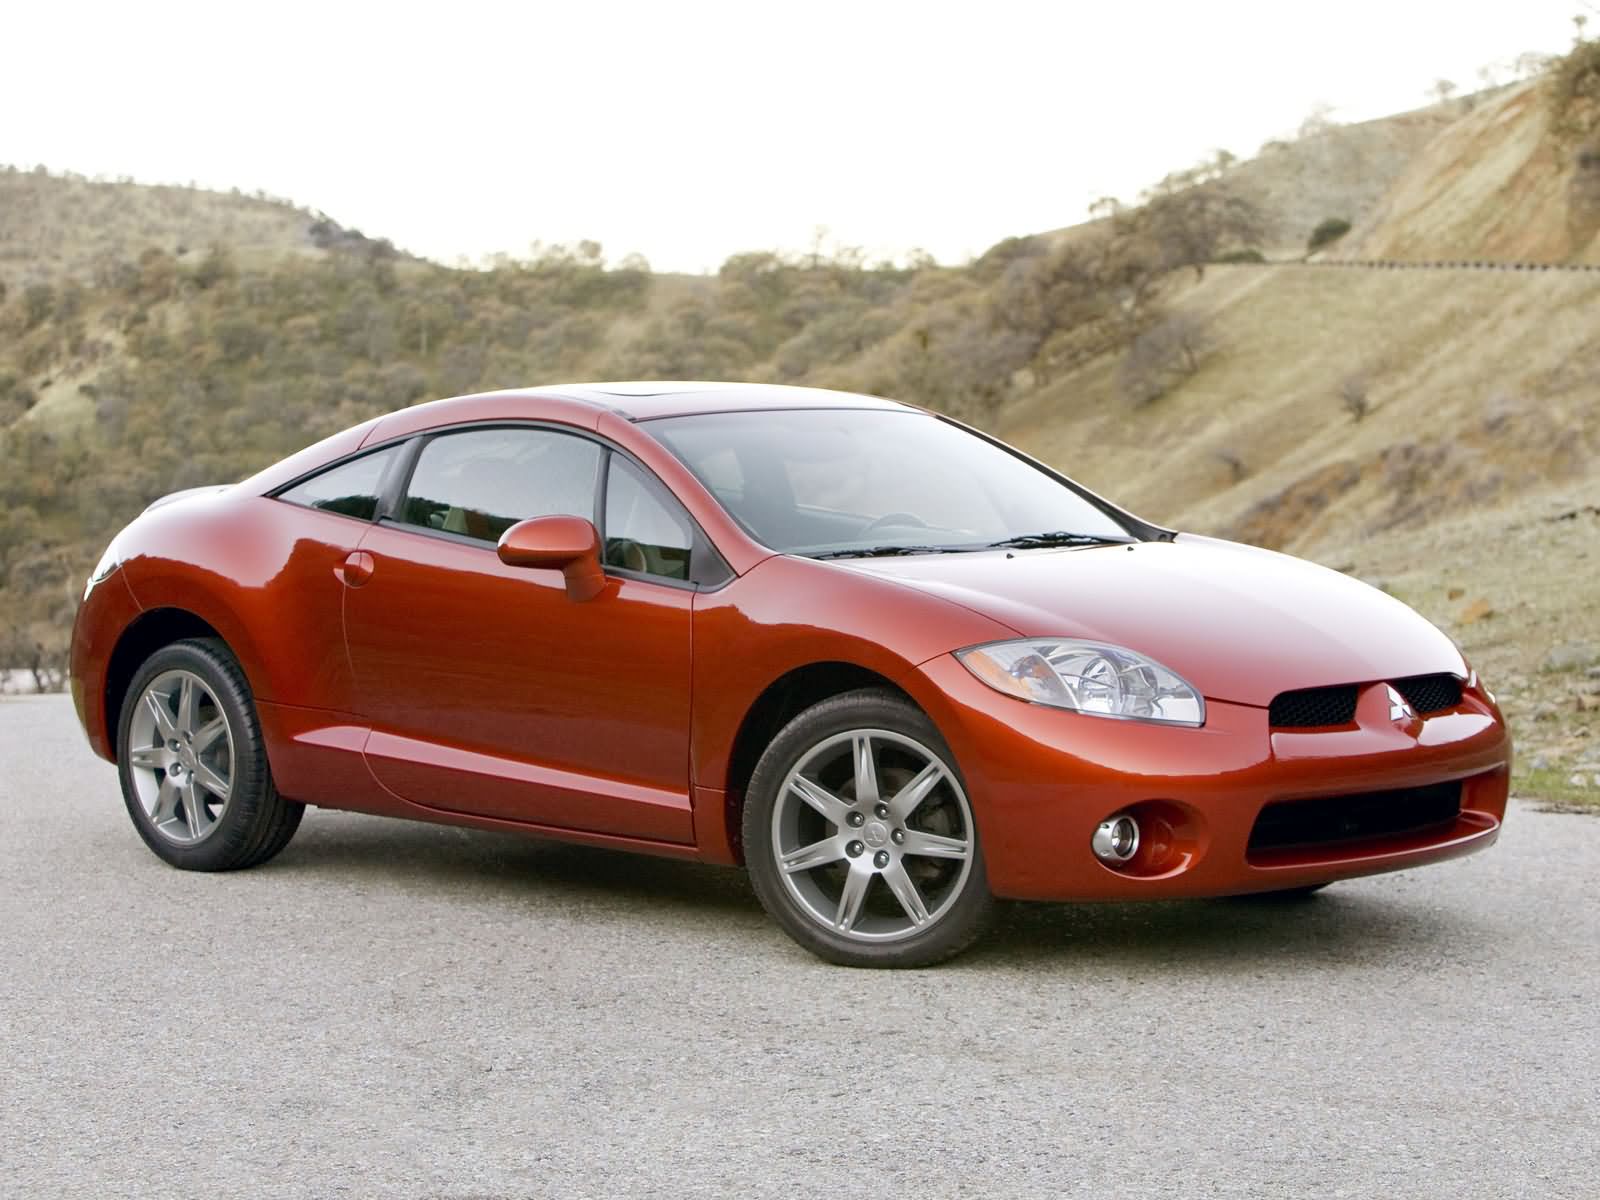 mitsubishi eclipse gt cars wallpapers and info mitsubishi eclipse gt